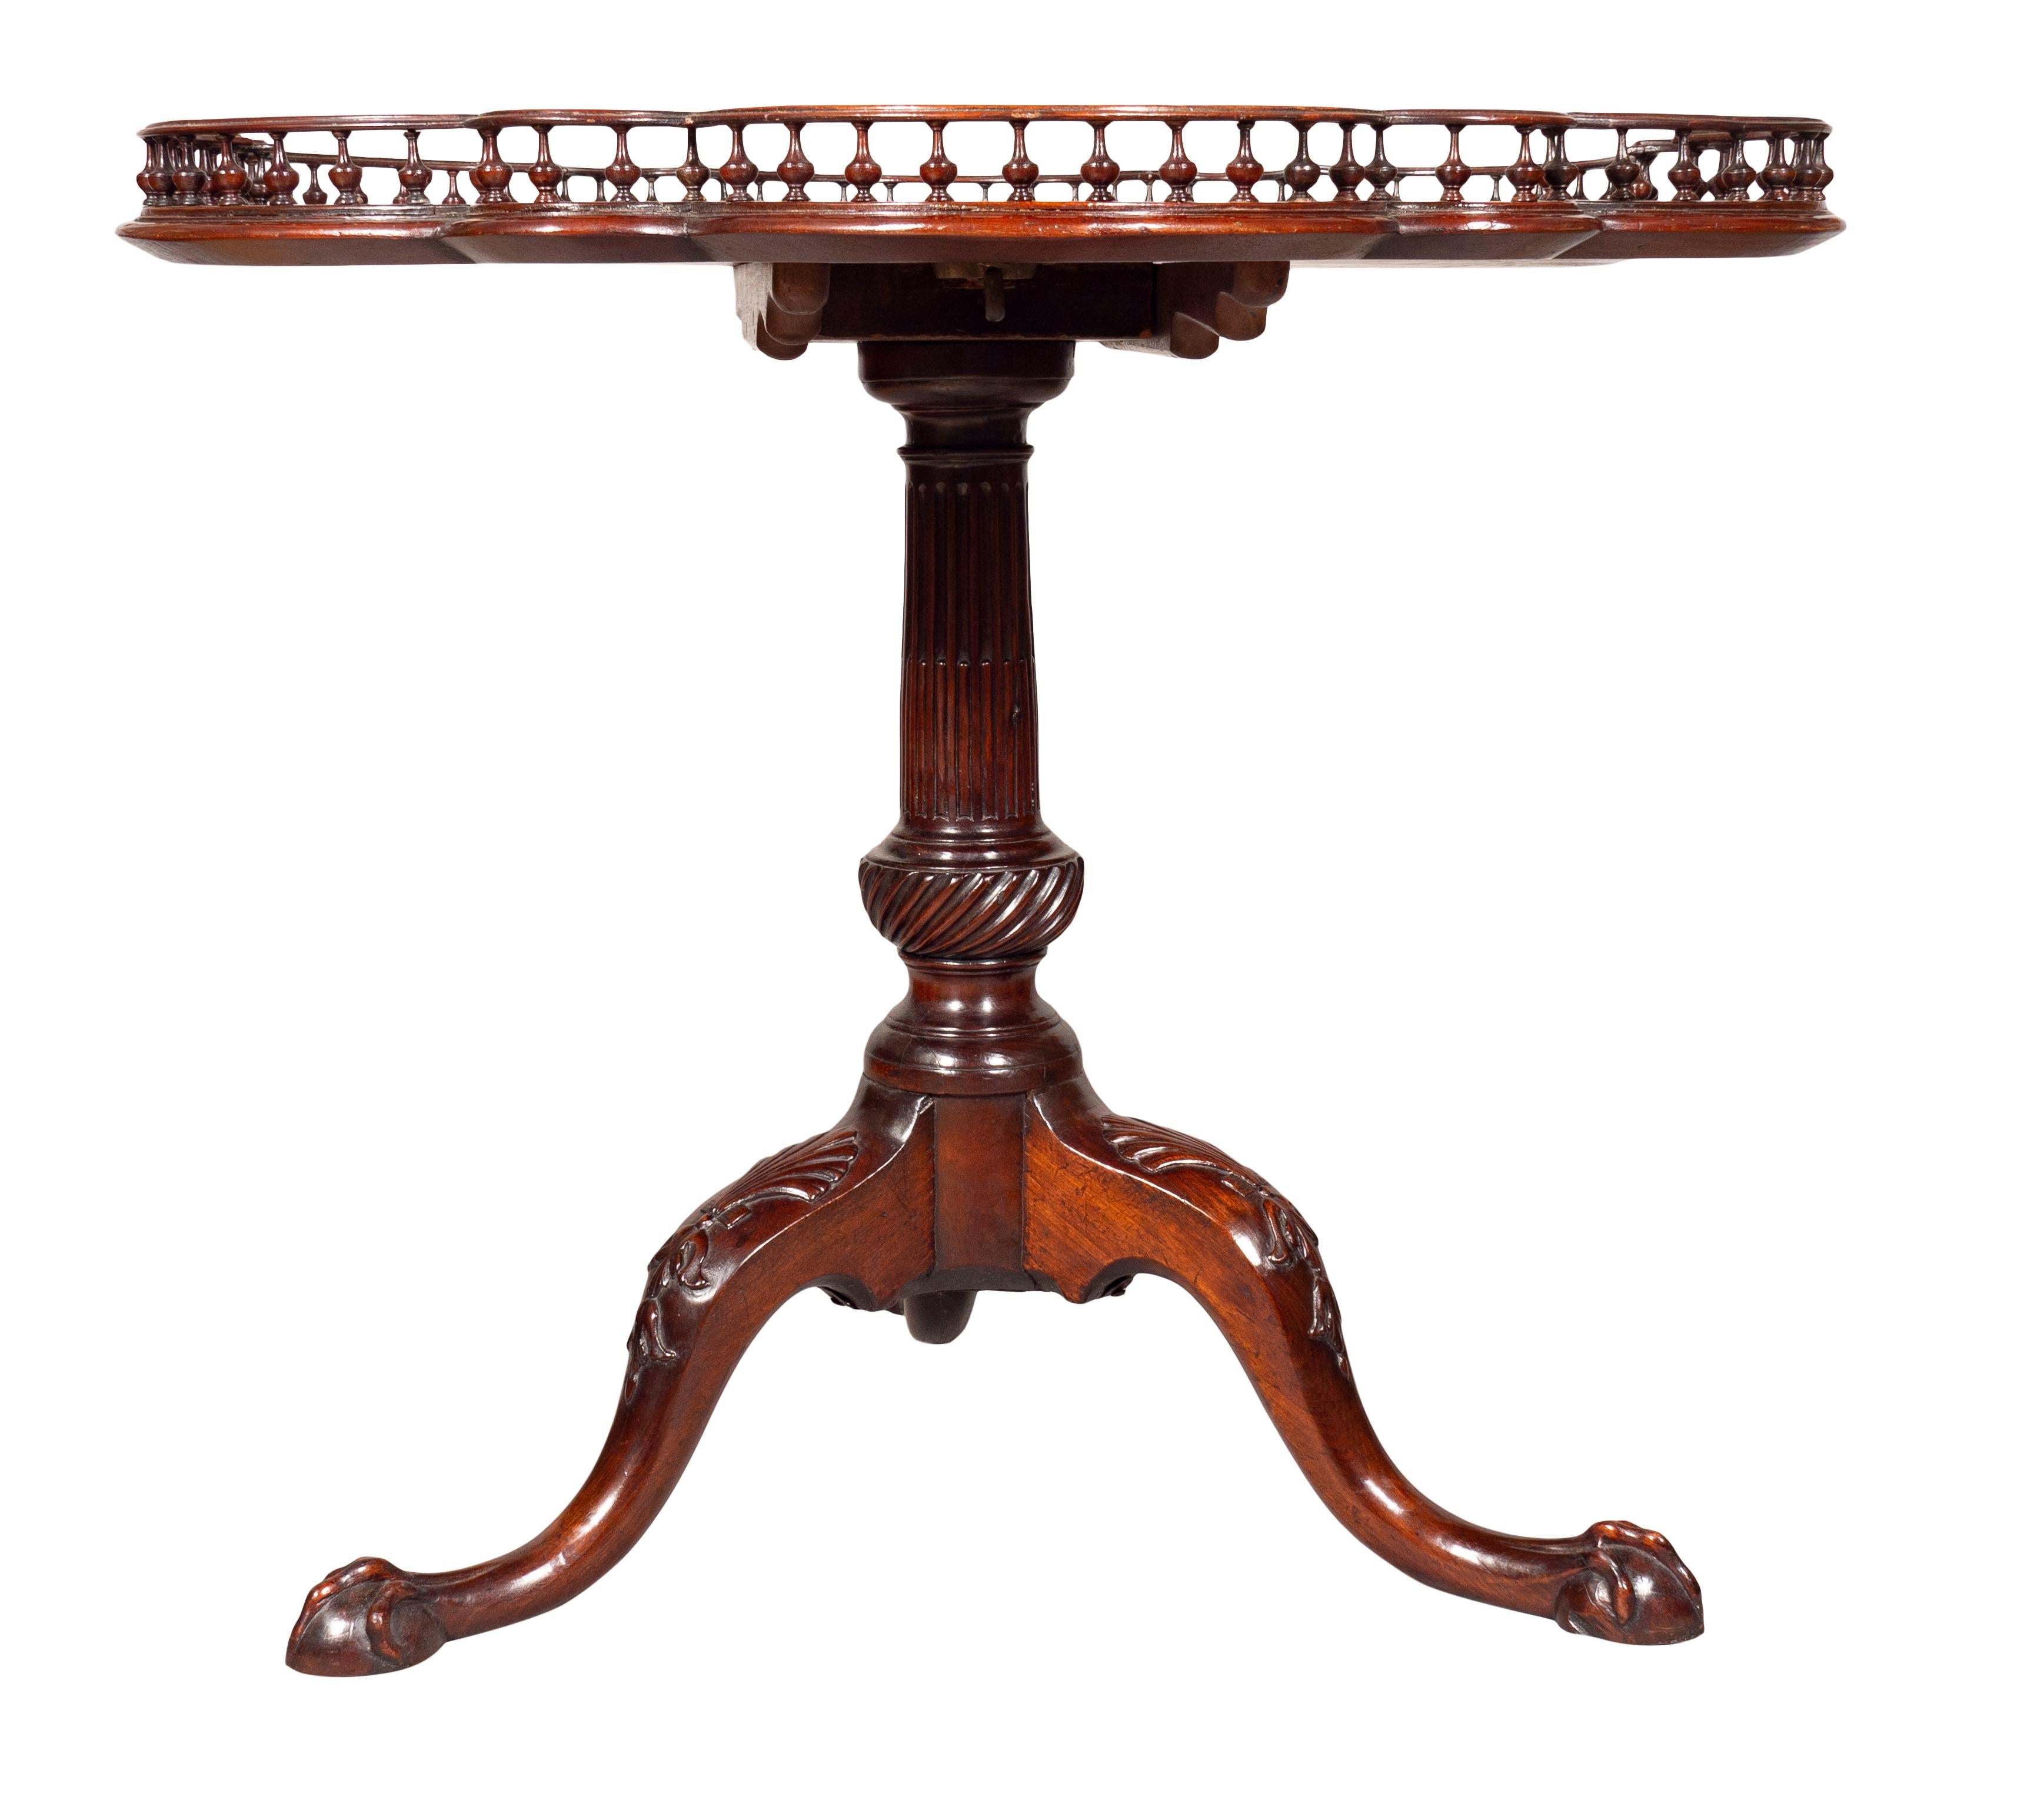 A beautiful table with elaborately shaped and spindled top. Fine timbers. Wonderfully proportioned and build with strength and quality in mind. Twelve lobed top of very generous proportions. The support turned and stop fluted and flattened spiral